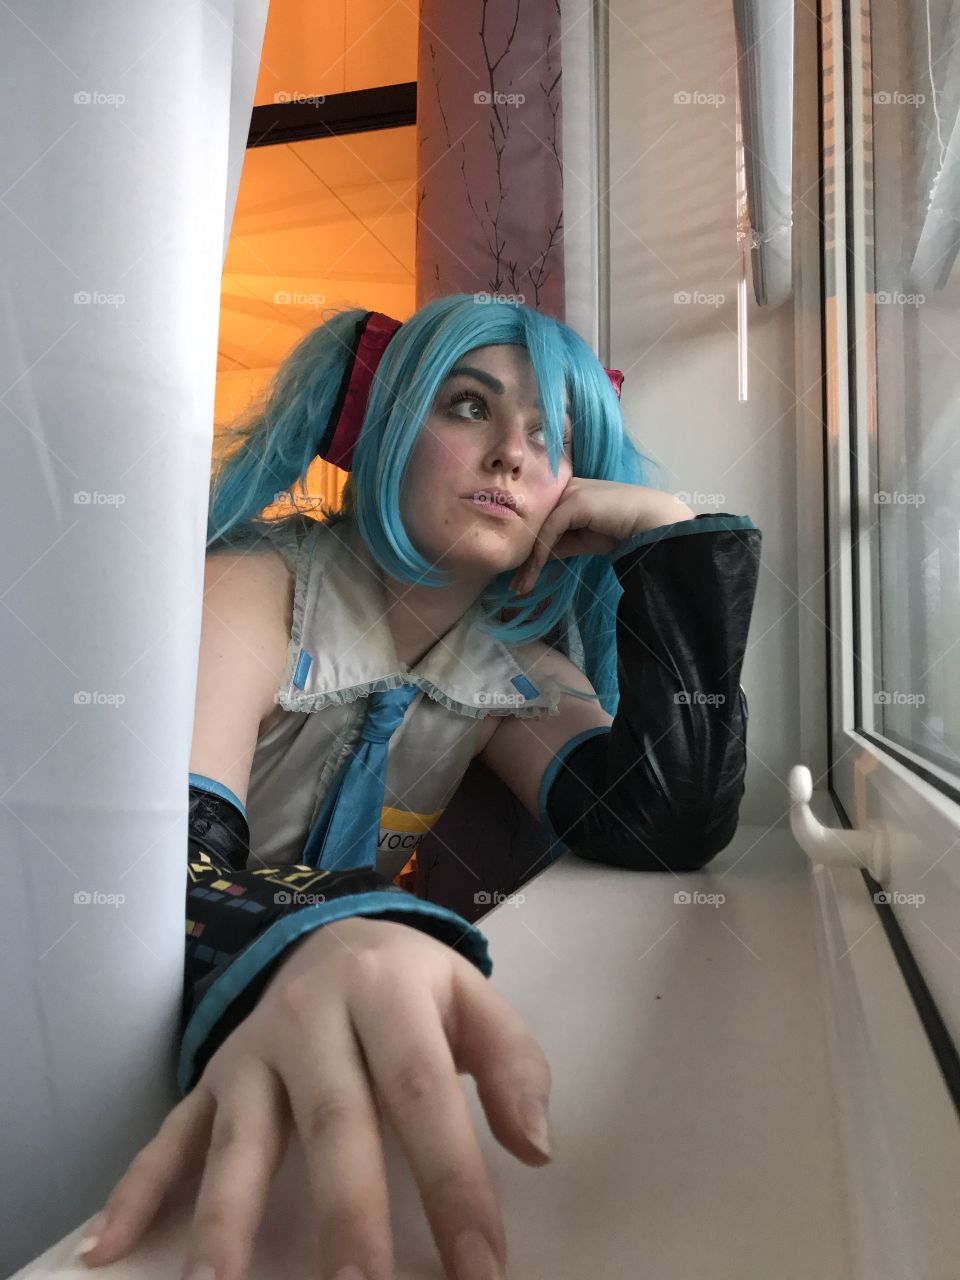 Hatsune Miku looking out the window.